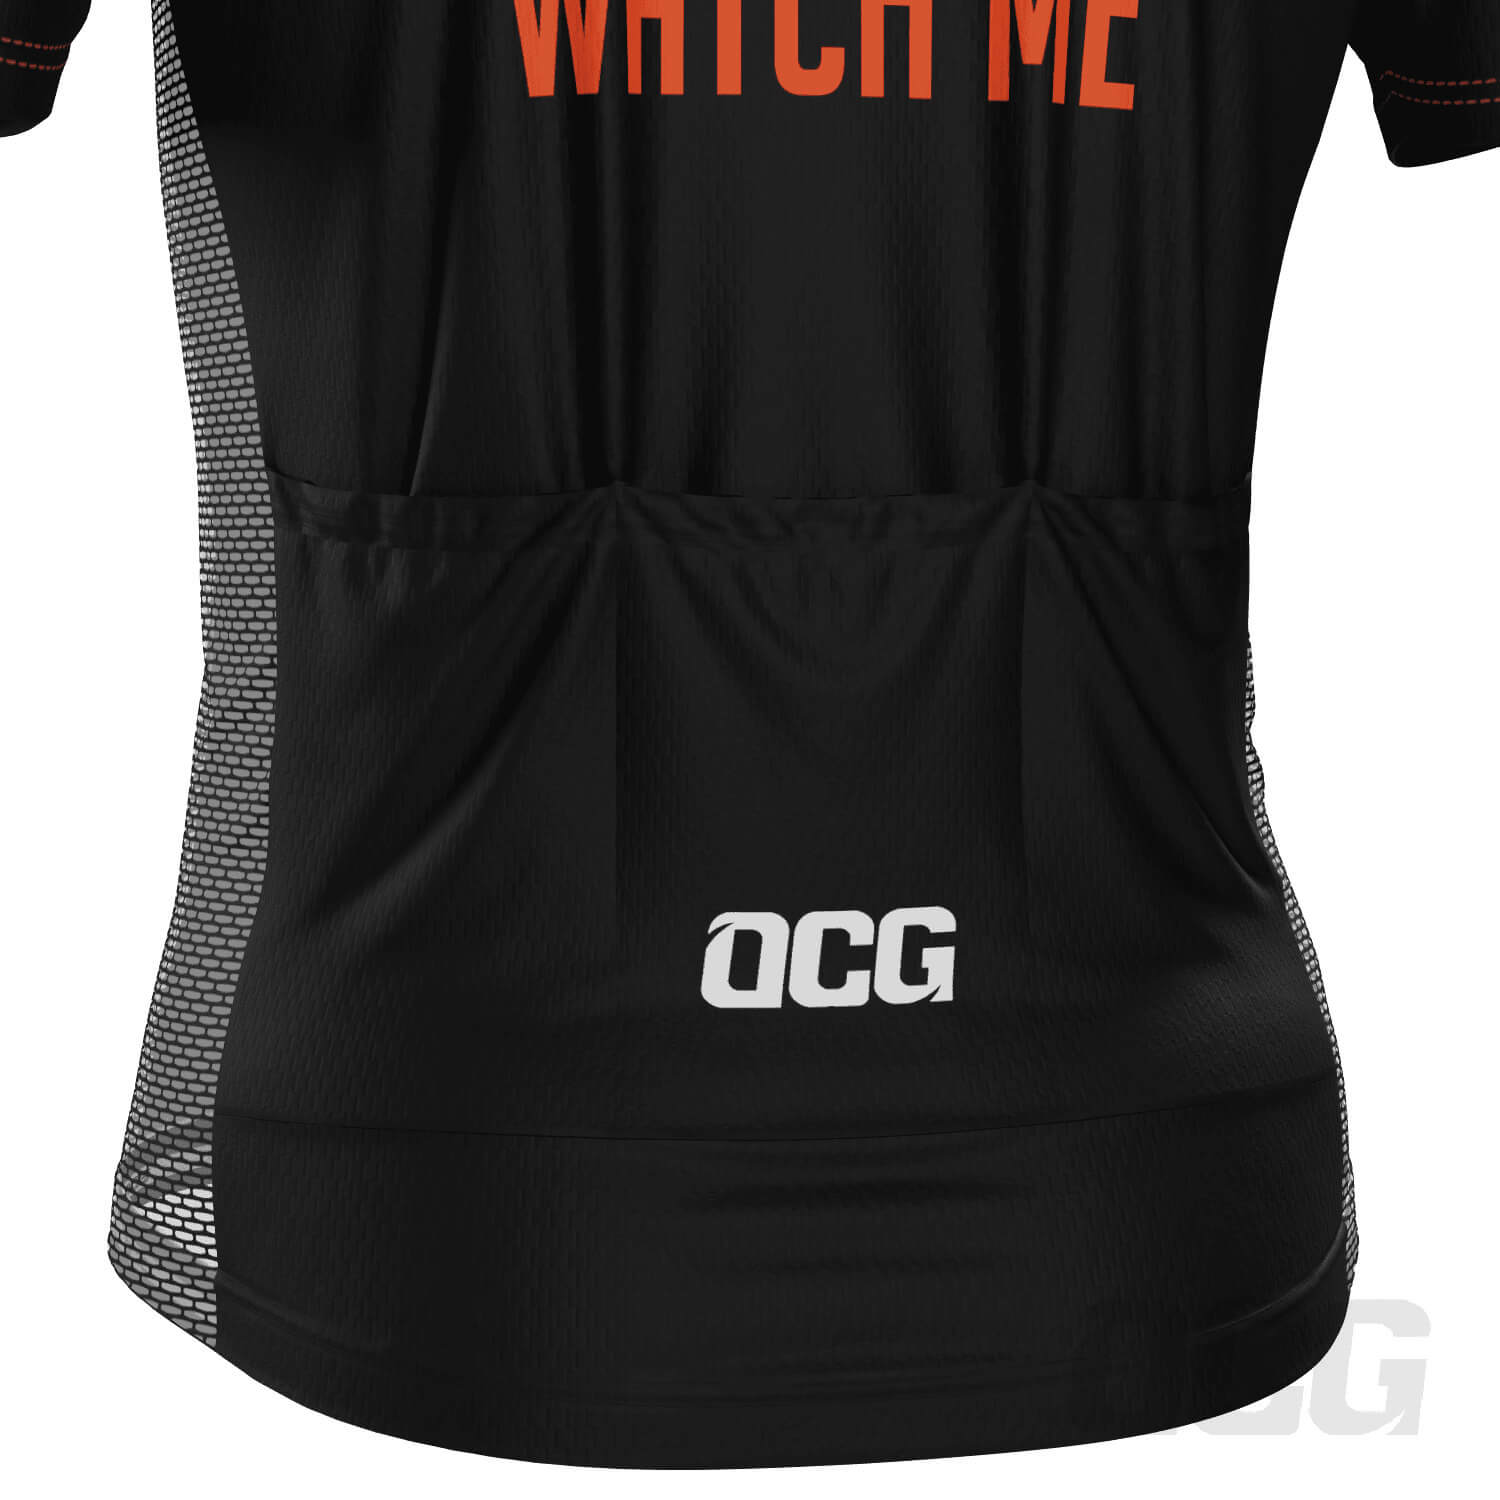 Men's I Can I Will. Watch Me Short Sleeve Cycling Jersey